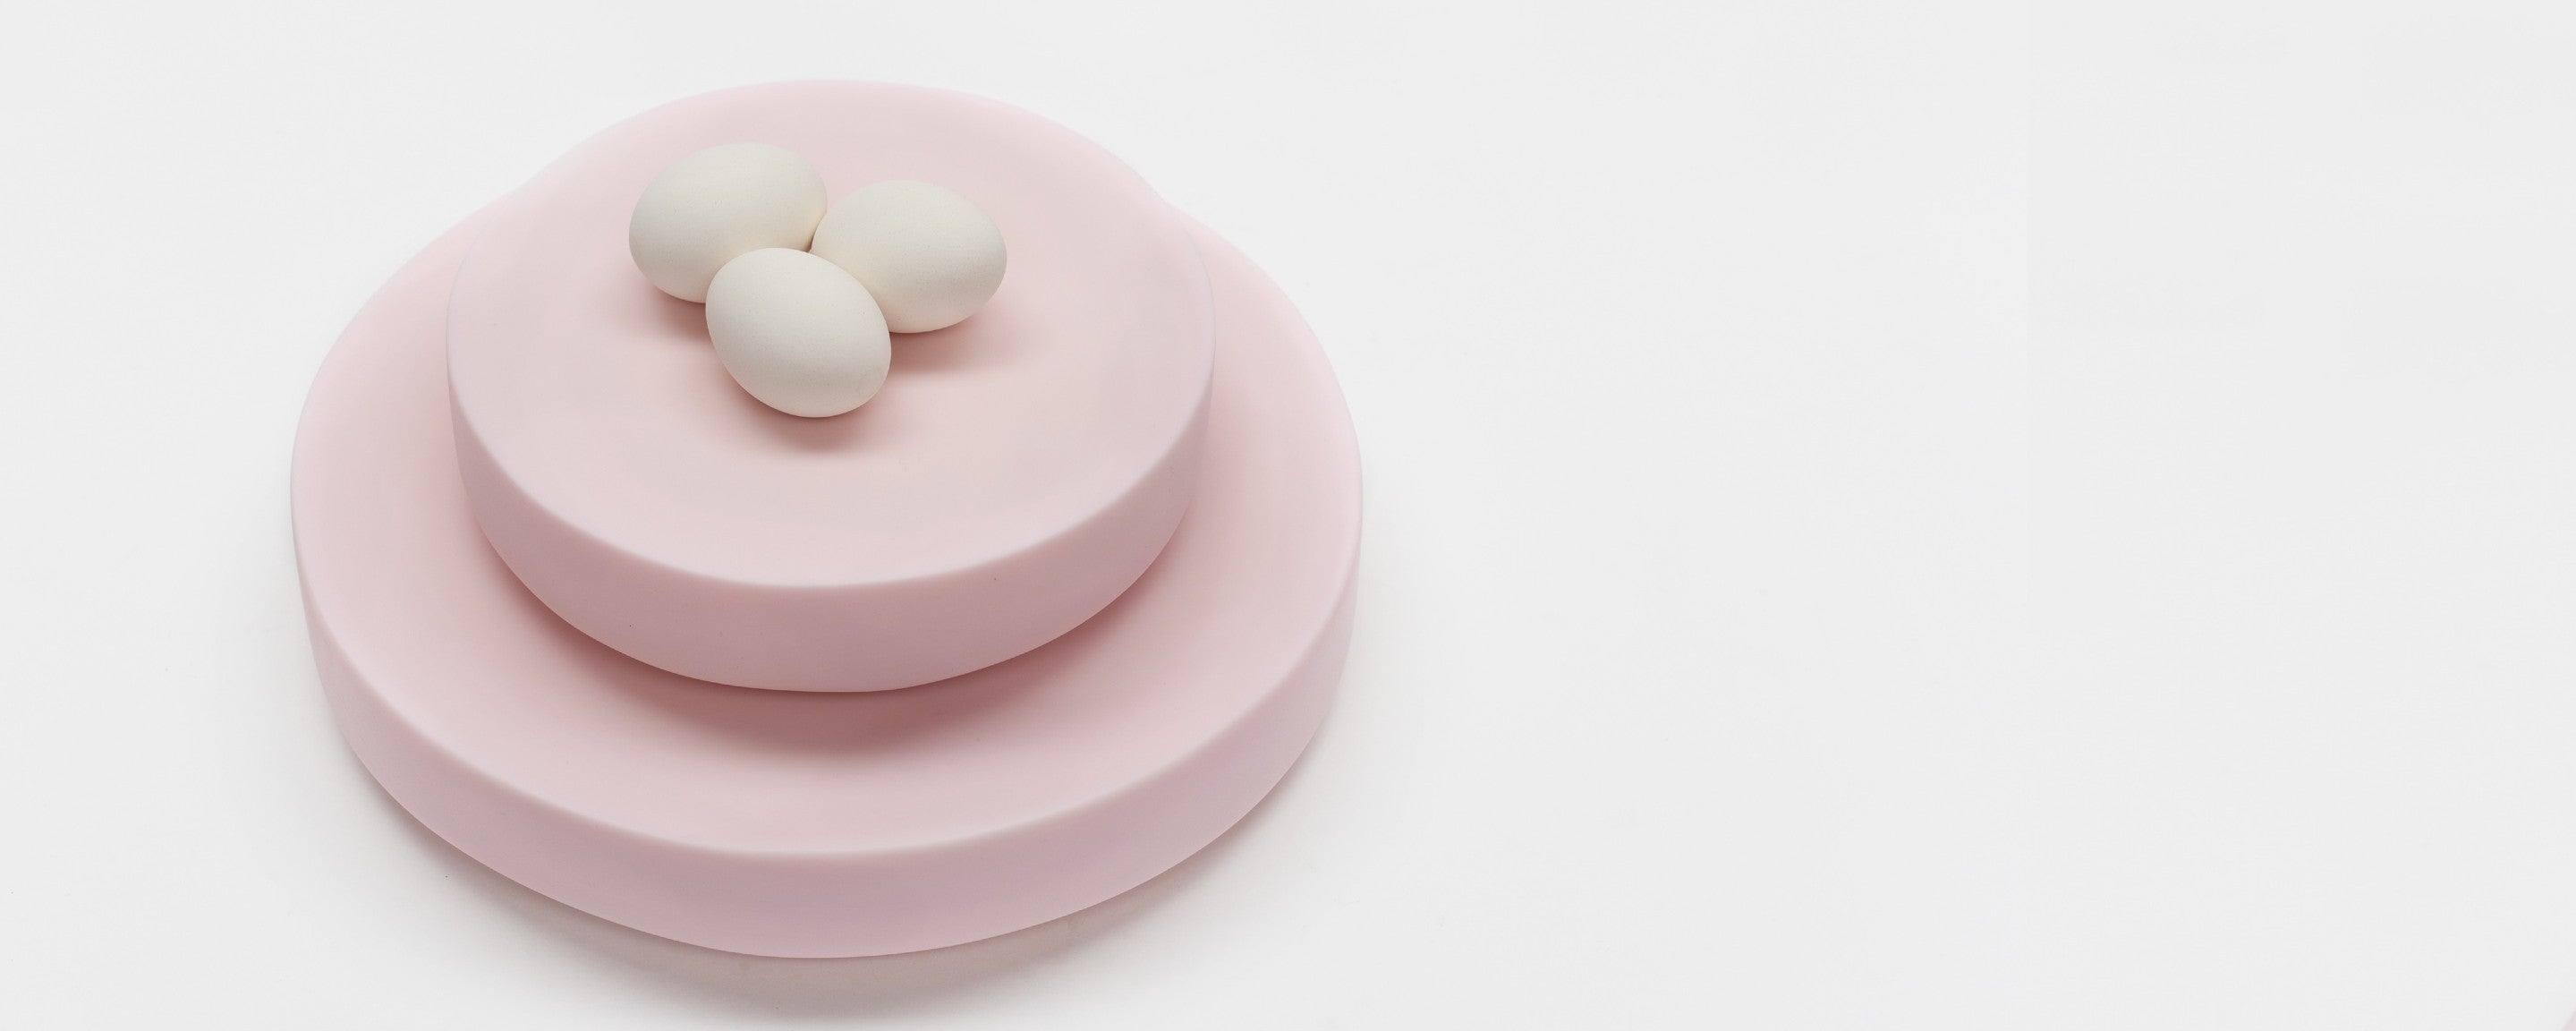 resin plateau pale rose platter collection by tina frey